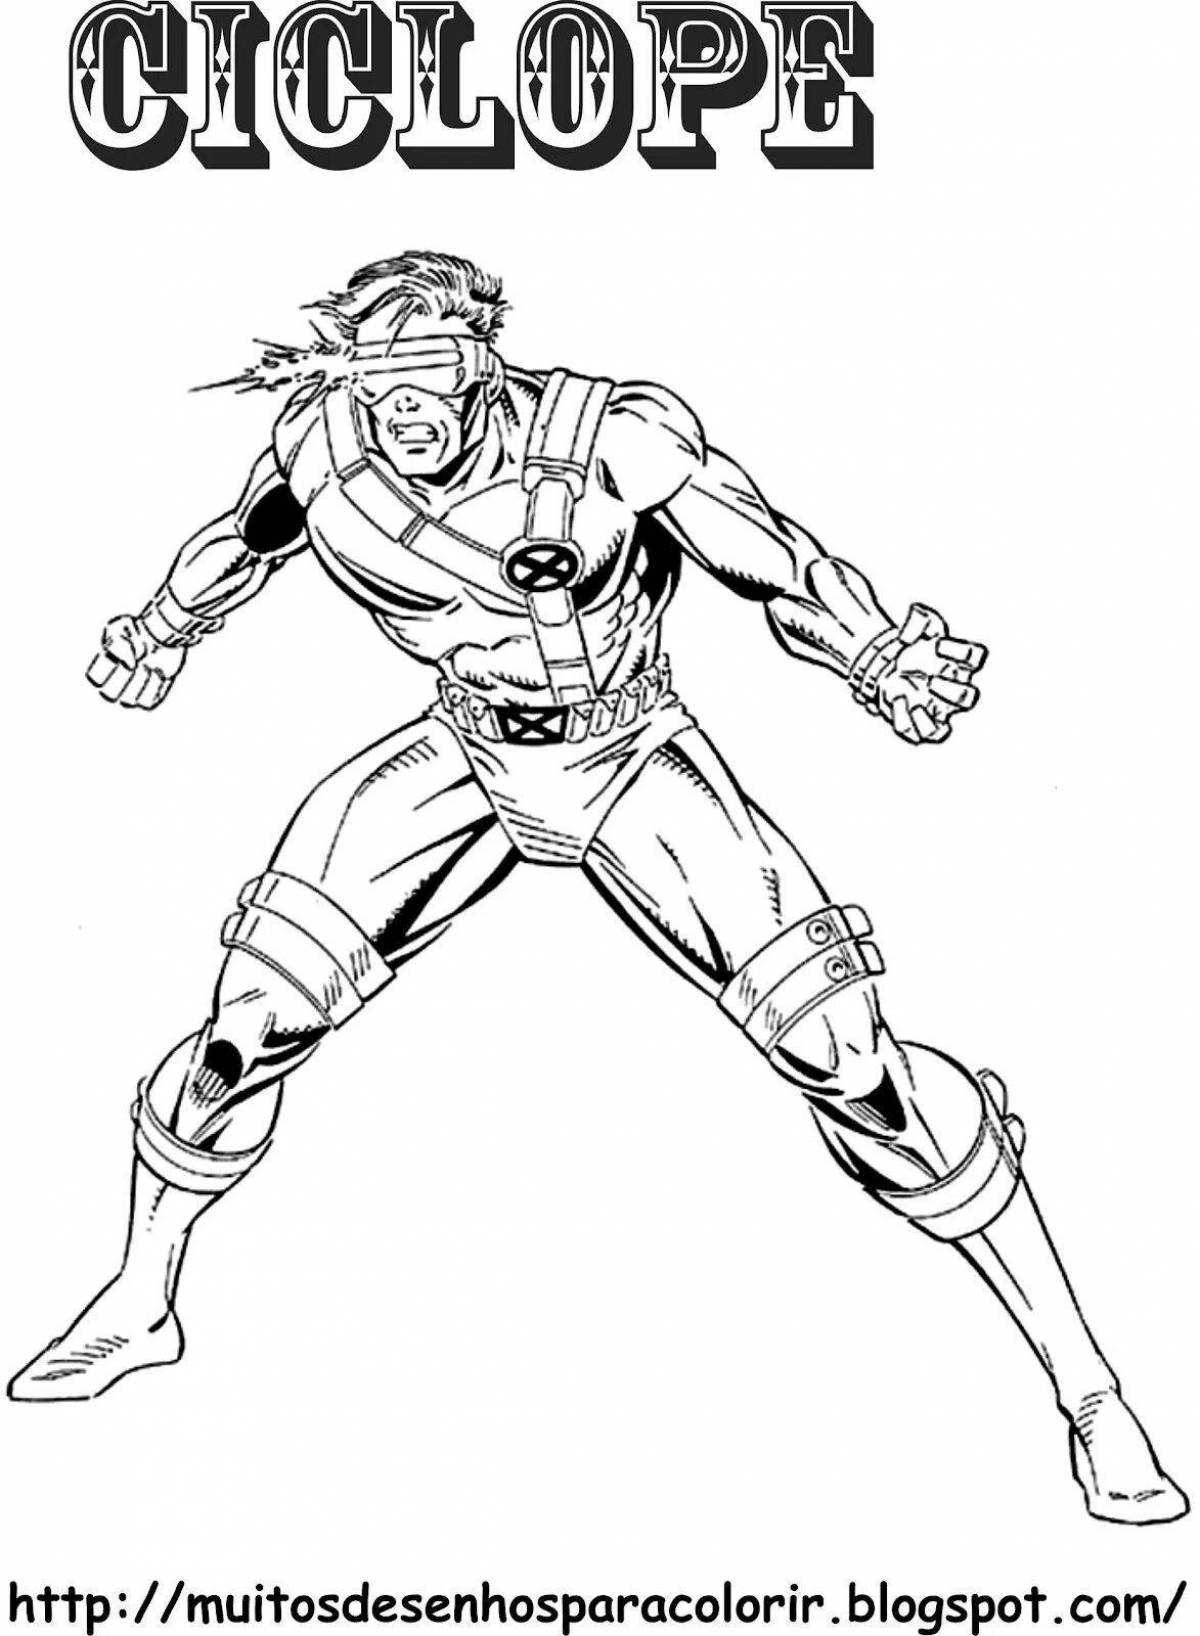 Xavier thorpe's vibrant coloring page